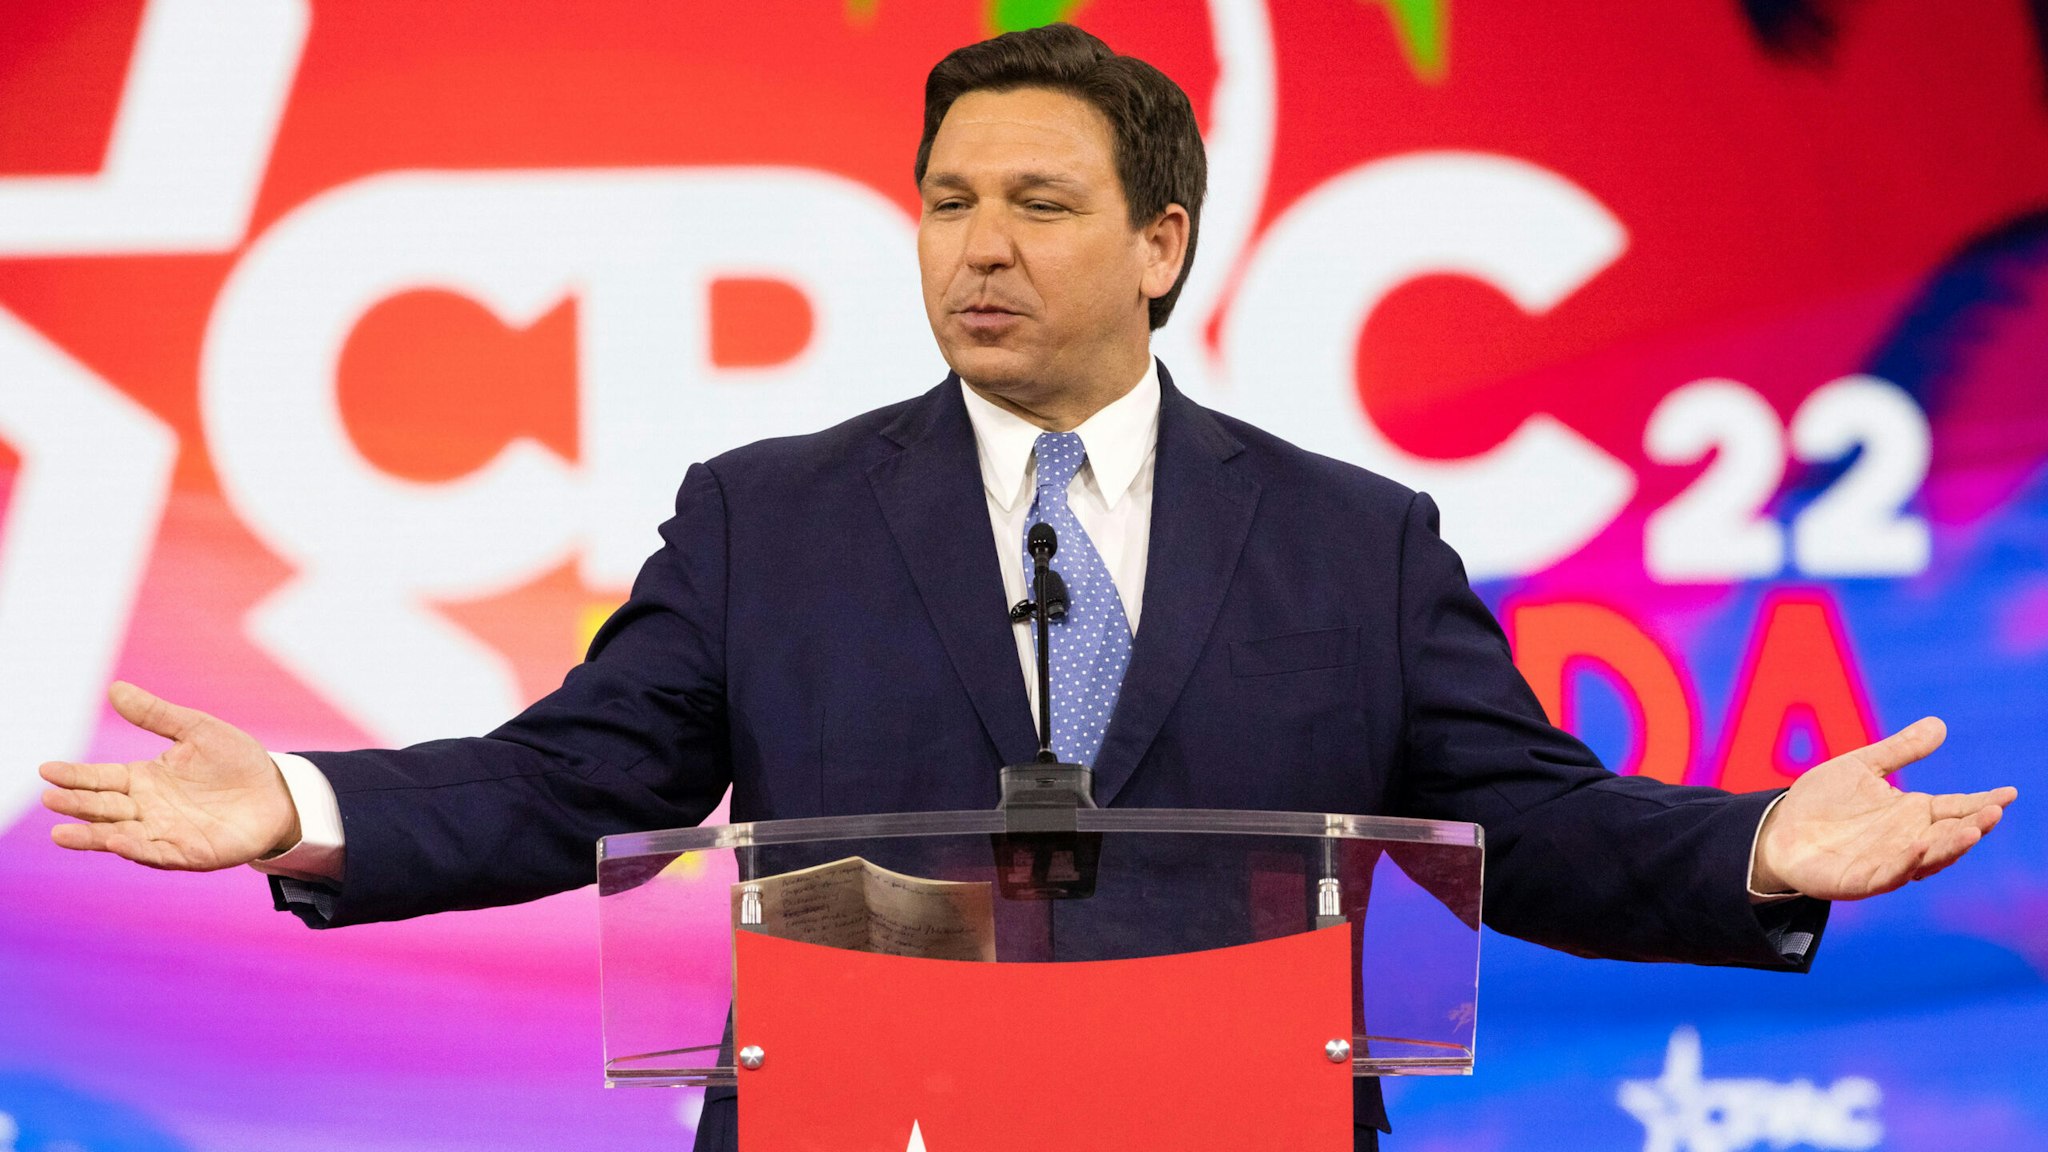 Ron DeSantis, governor of Florida, speaks during the Conservative Political Action Conference (CPAC) in Orlando, Florida, U.S., on Thursday, Feb. 24, 2022. Launched in 1974, the Conservative Political Action Conference is the largest gathering of conservatives in the world.